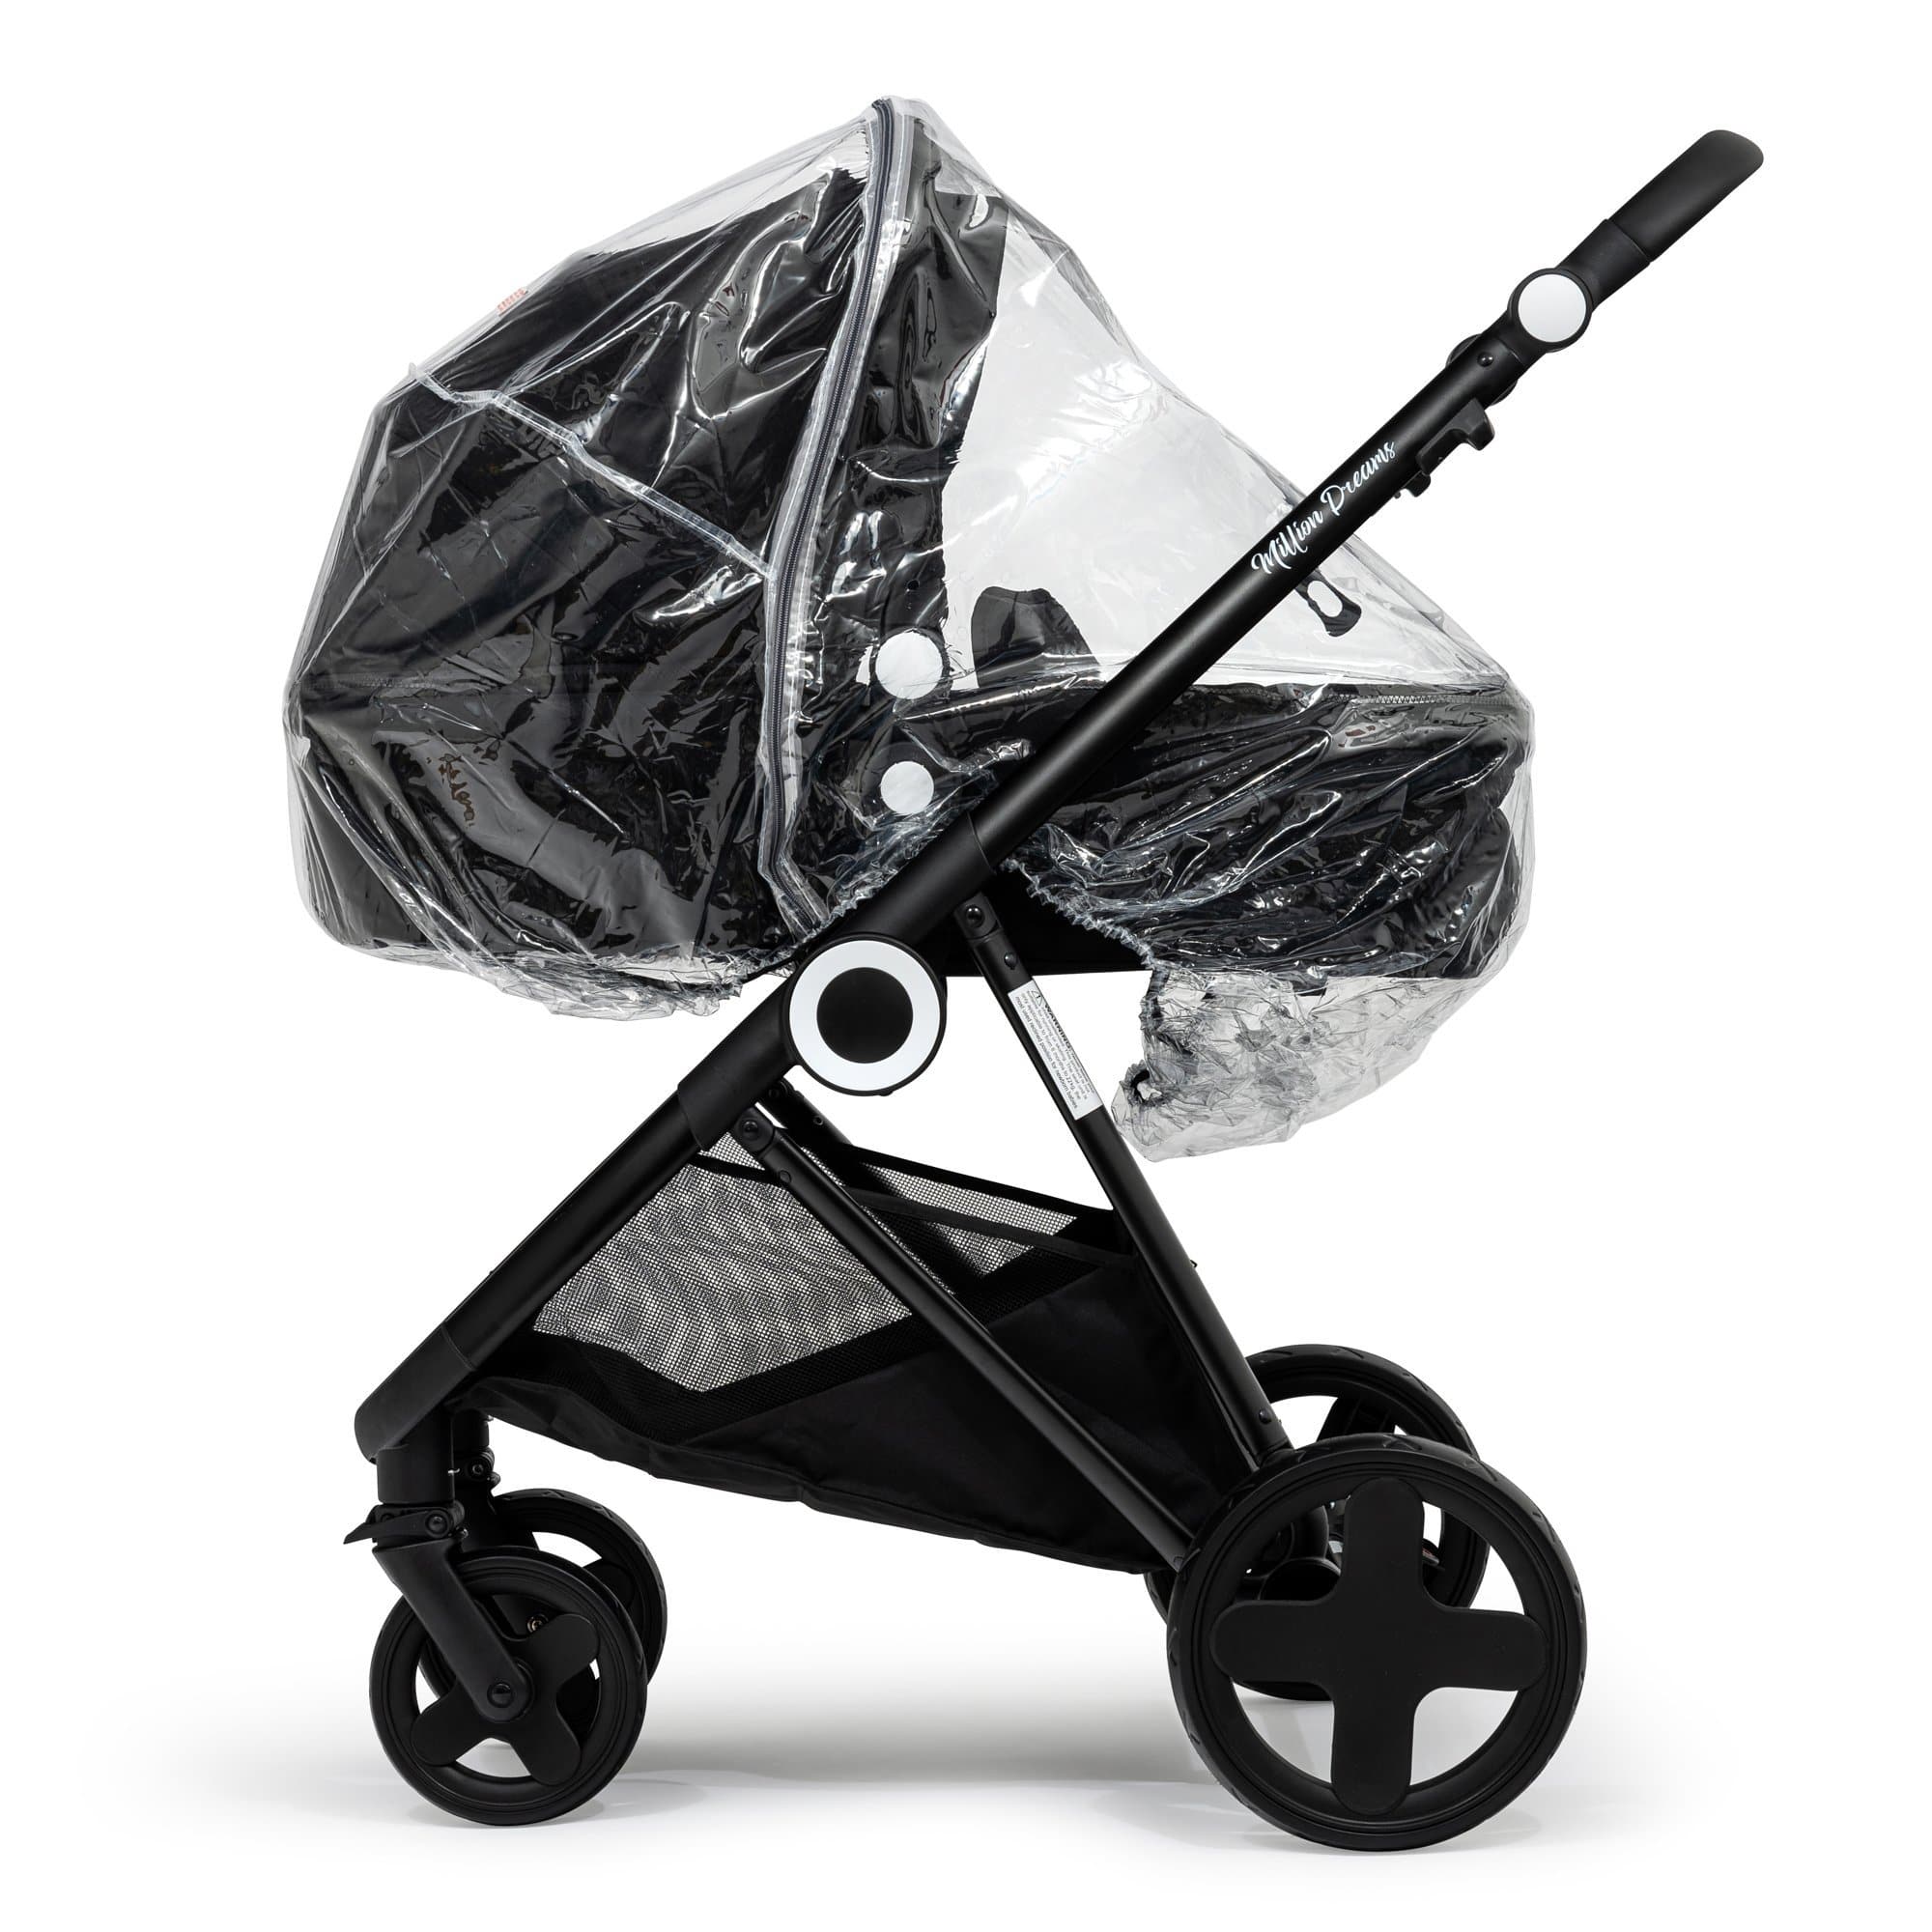 2 in 1 Rain Cover Compatible with Orbit - Fits All Models - For Your Little One